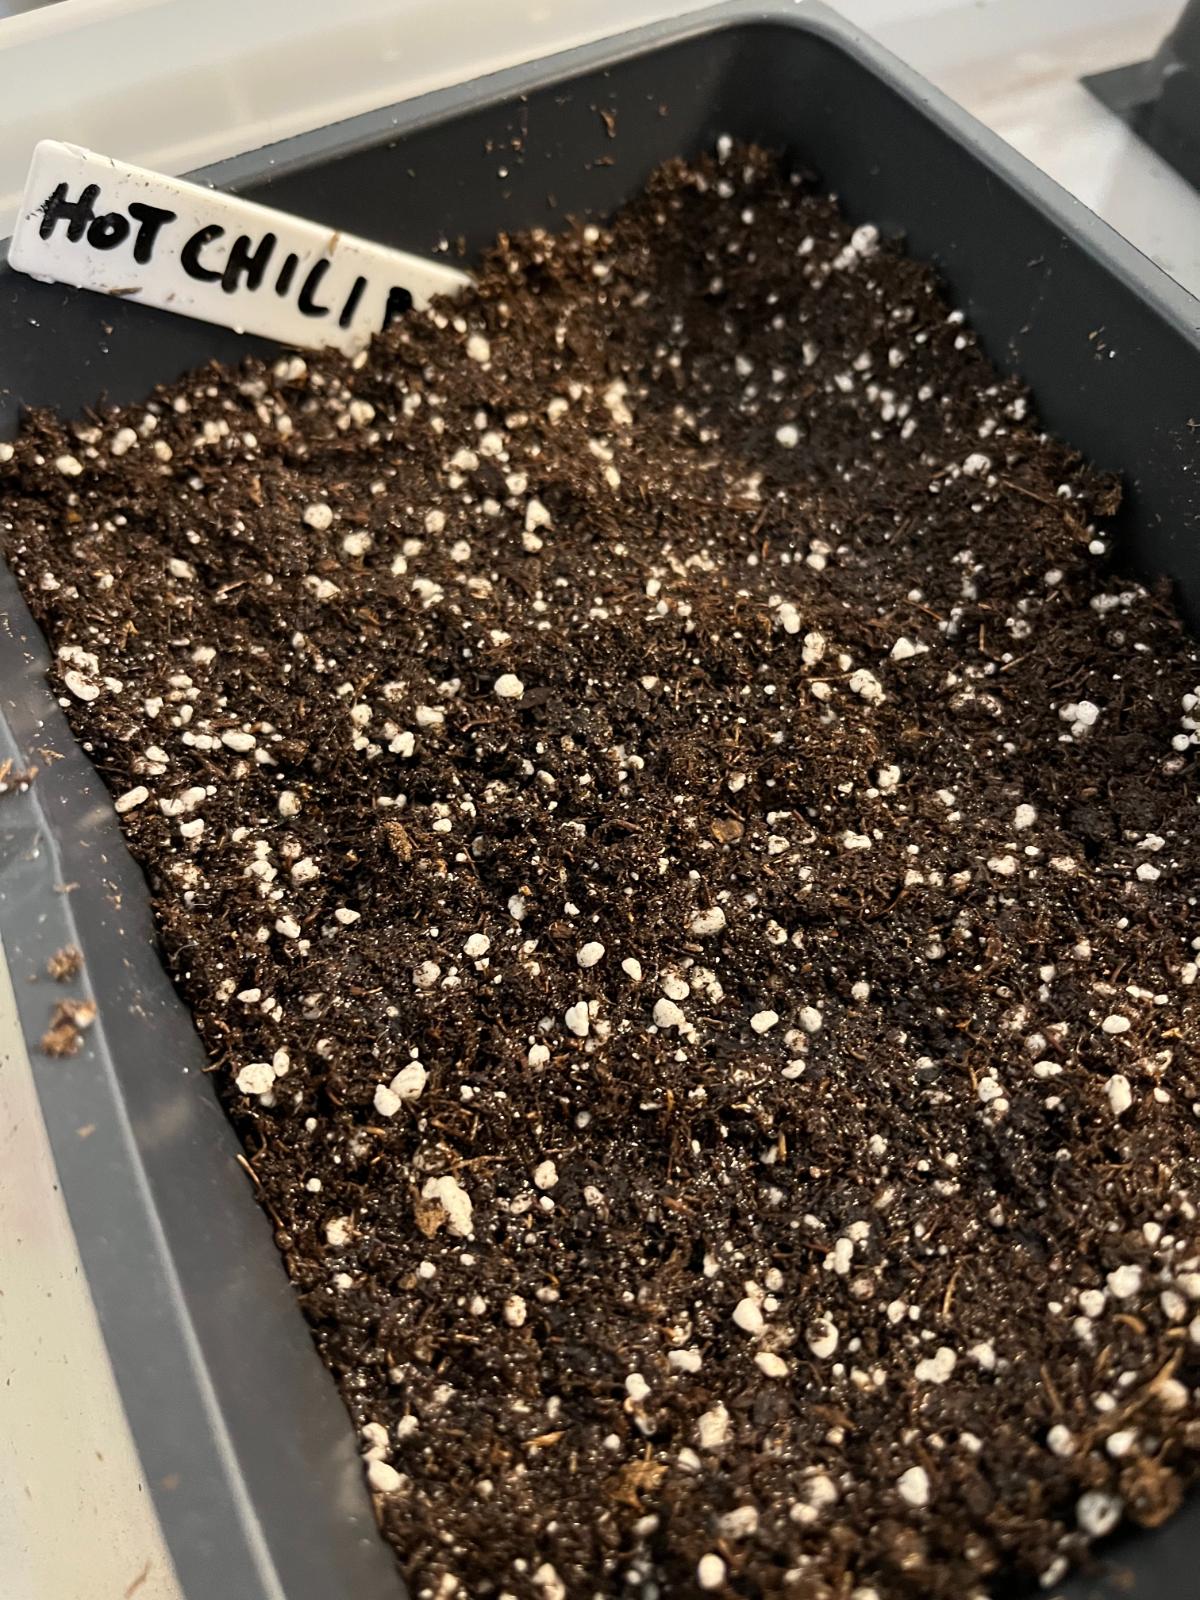 Soil with seeds not germinating